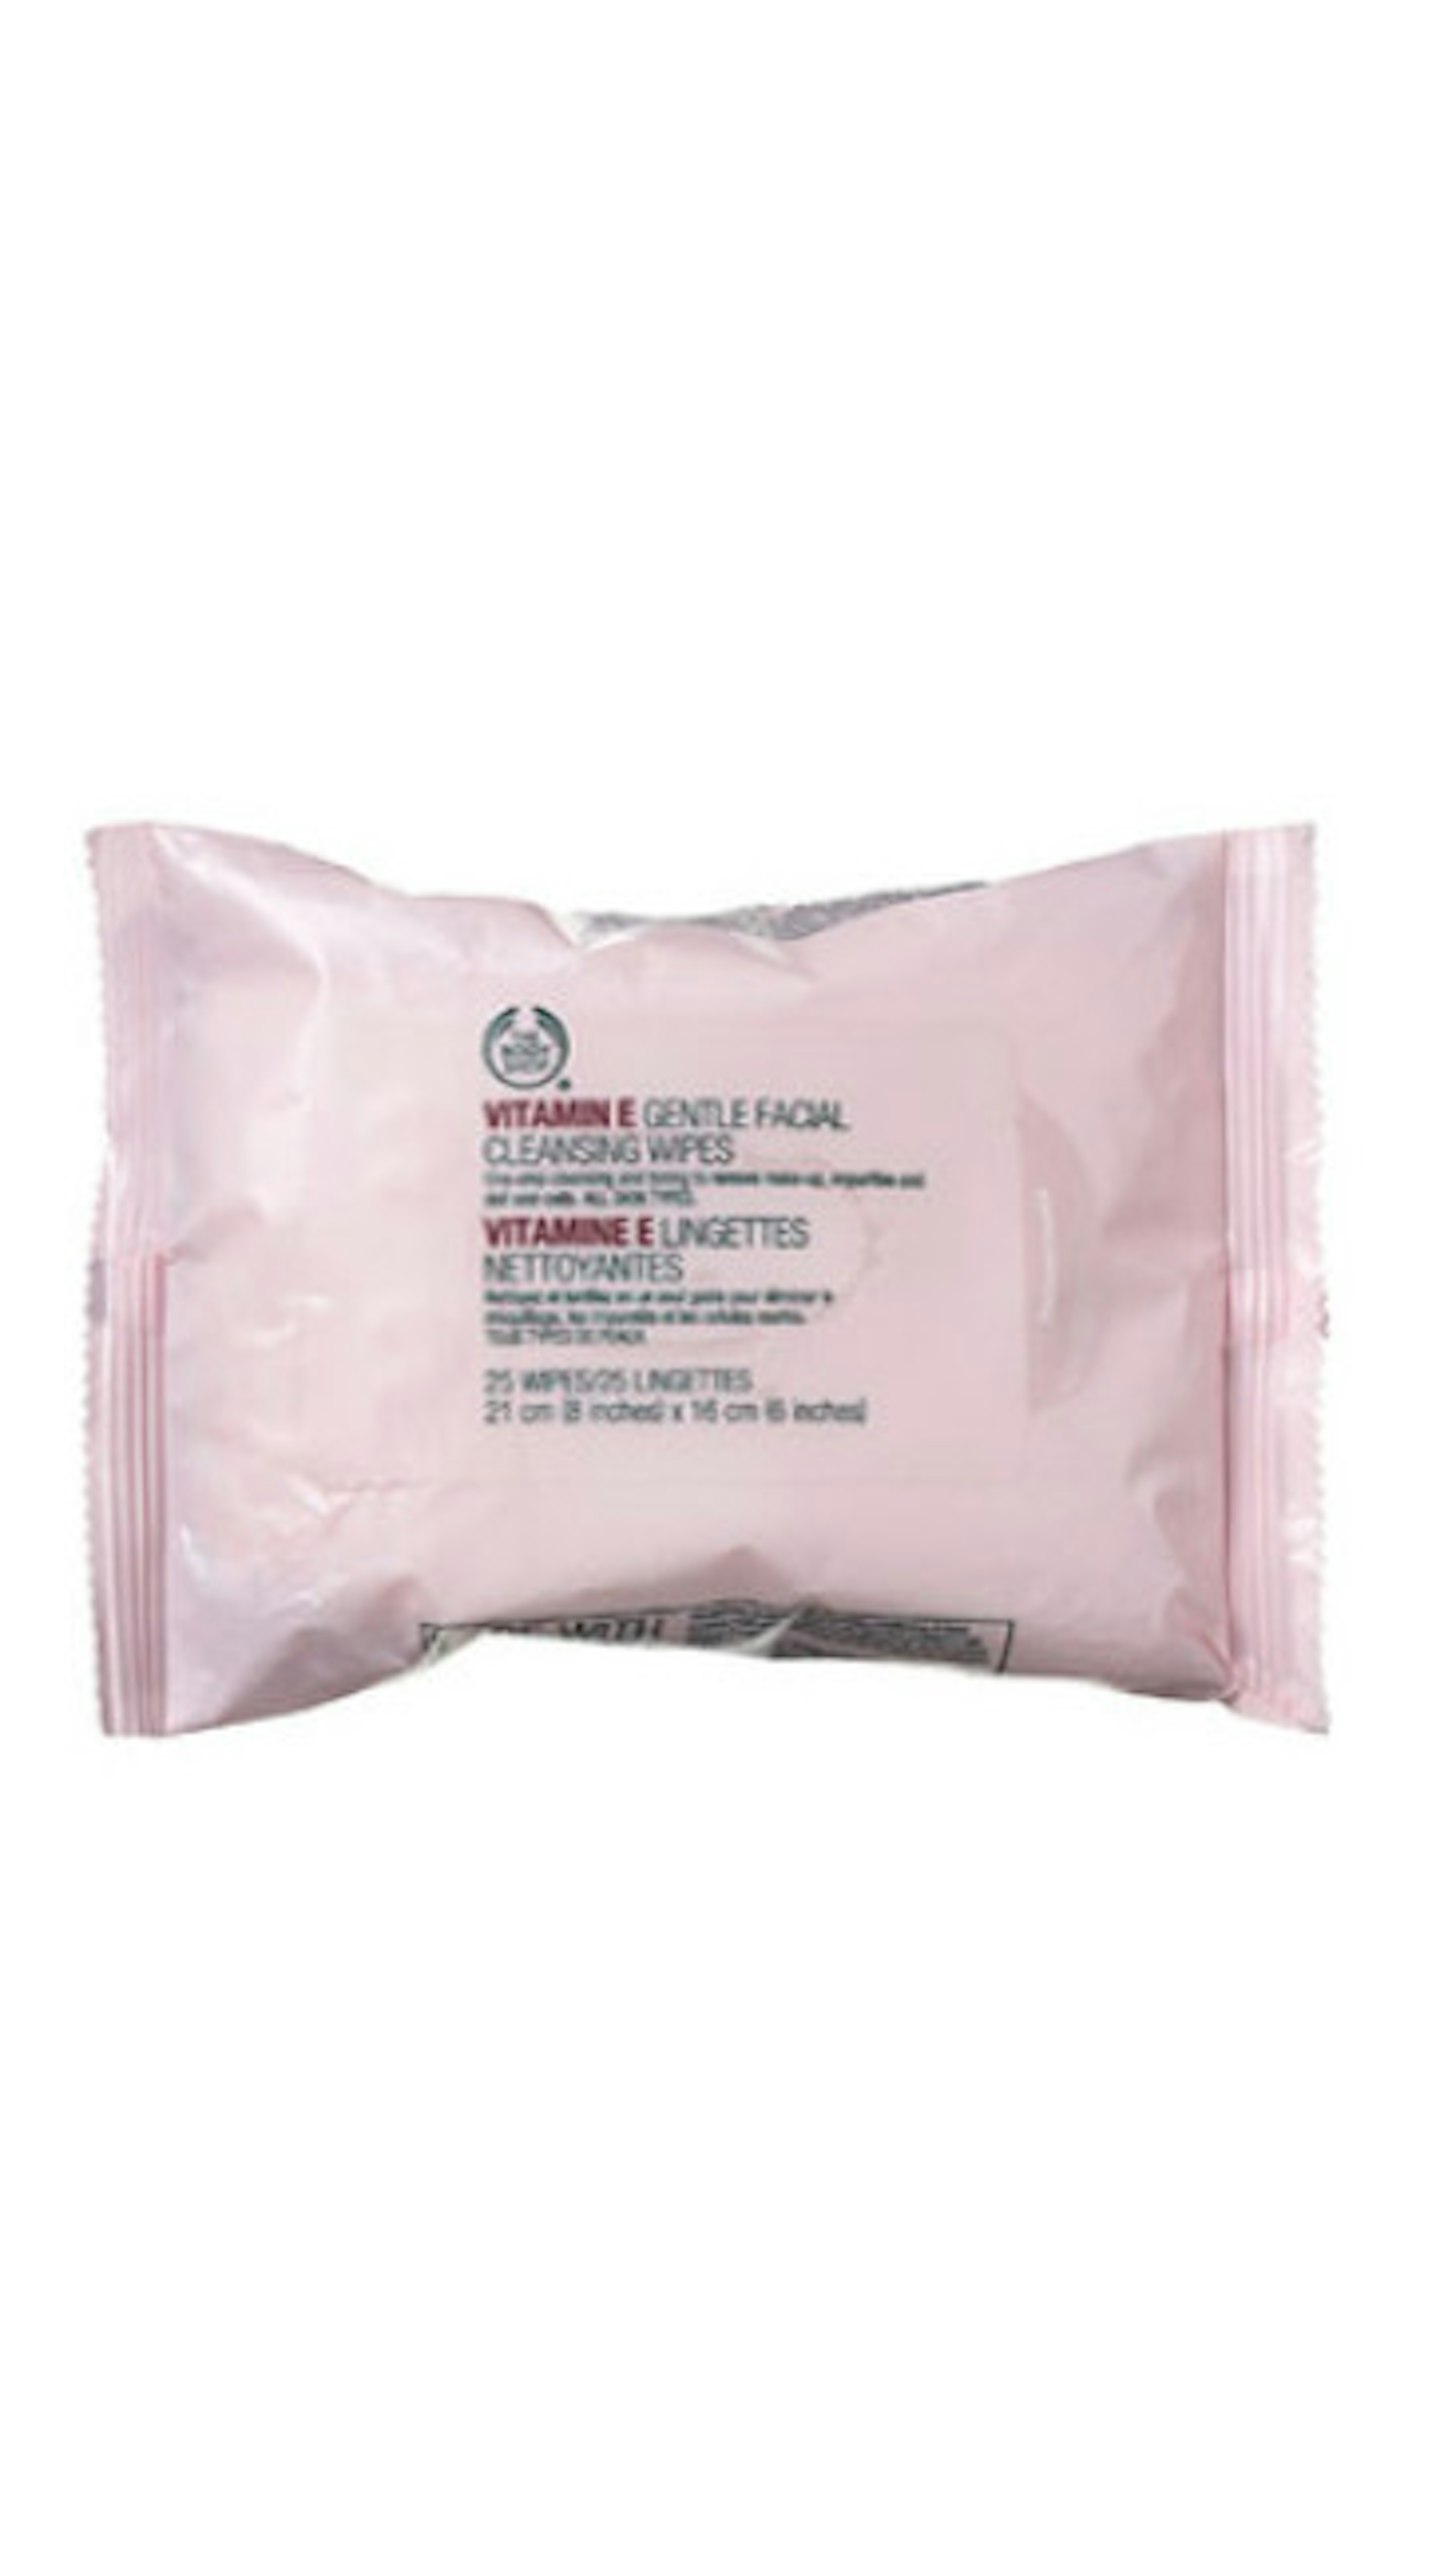 Vitamin E Gentle Facial Cleansing Wipes &pound;6 The Body Shop